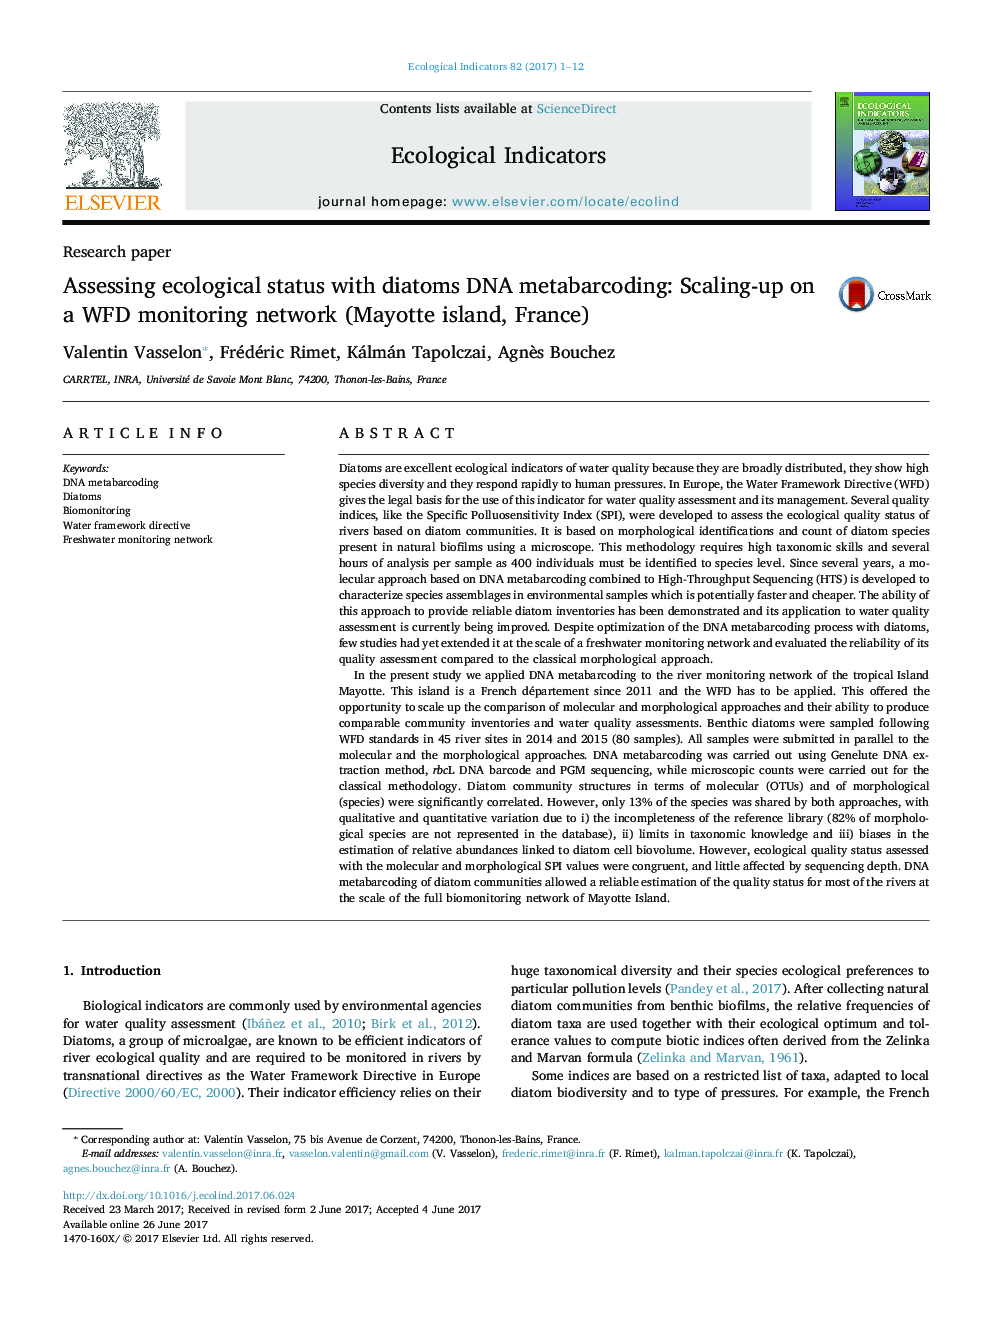 Research paperAssessing ecological status with diatoms DNA metabarcoding: Scaling-up on a WFD monitoring network (Mayotte island, France)